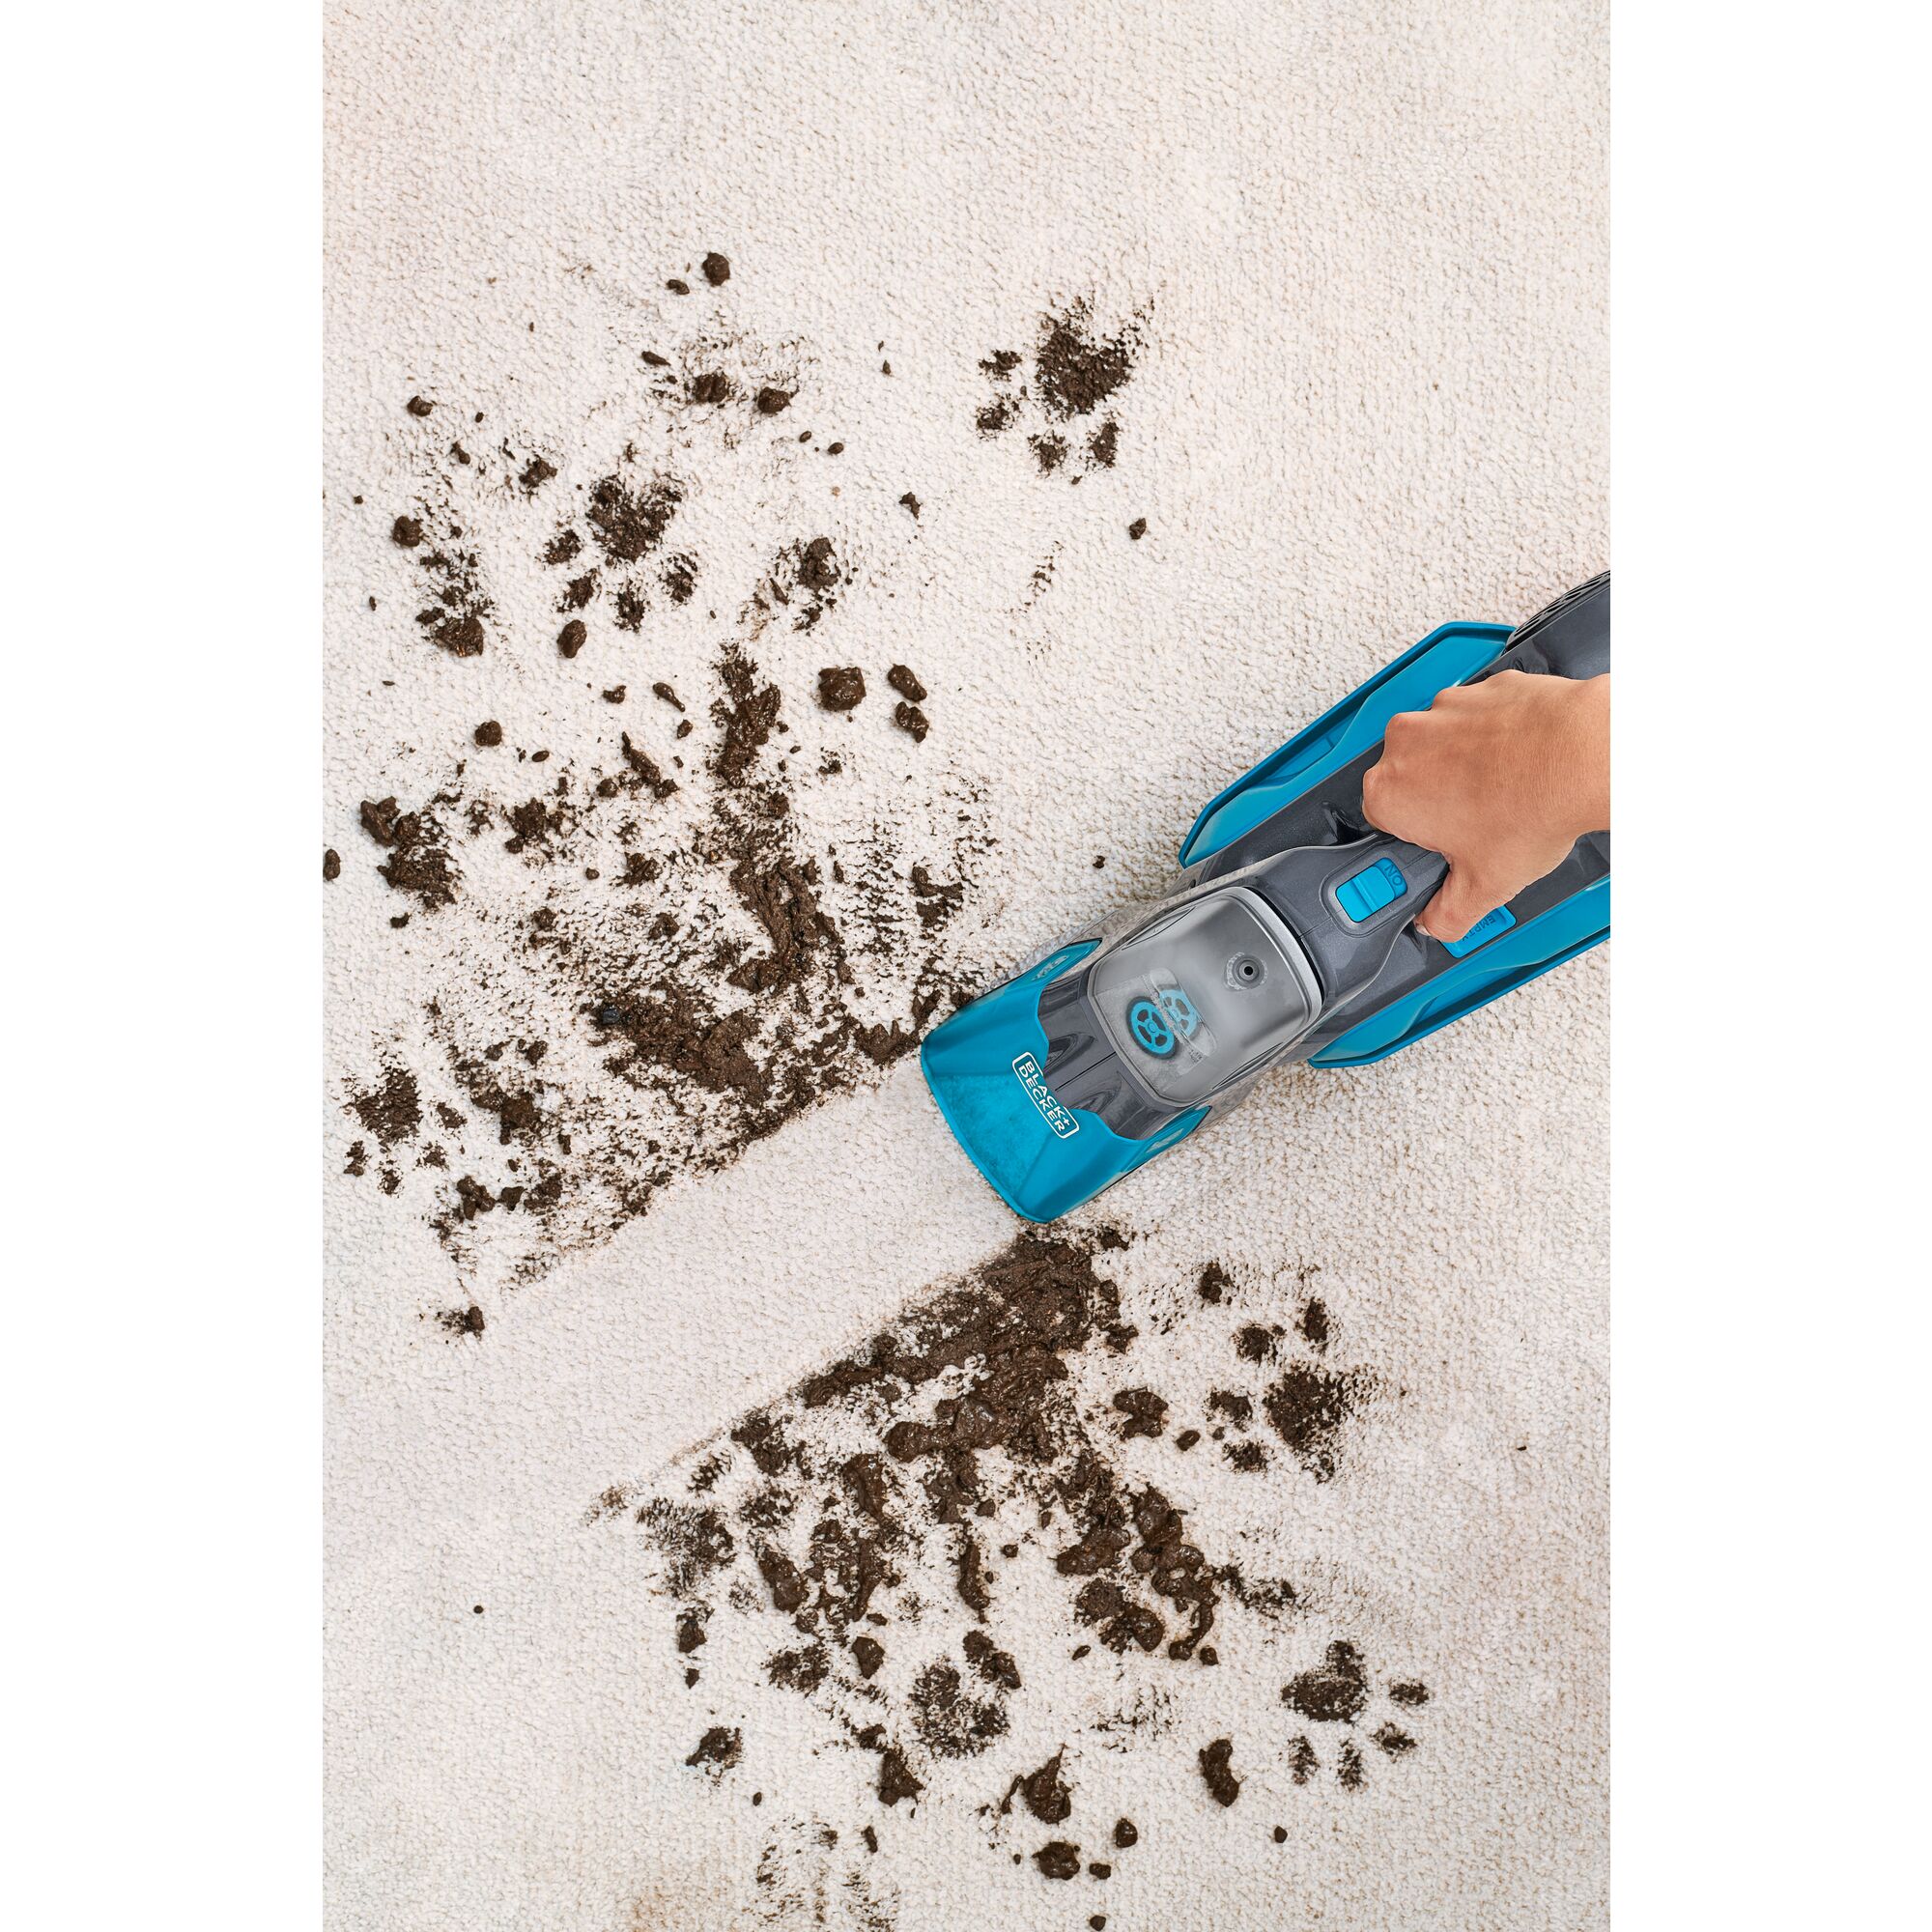 Black and decker Spillbuster Cordless Spill and Spot Cleaner With Extra Filter being used by a person to clean up muddy dog paw prints from a white carpet